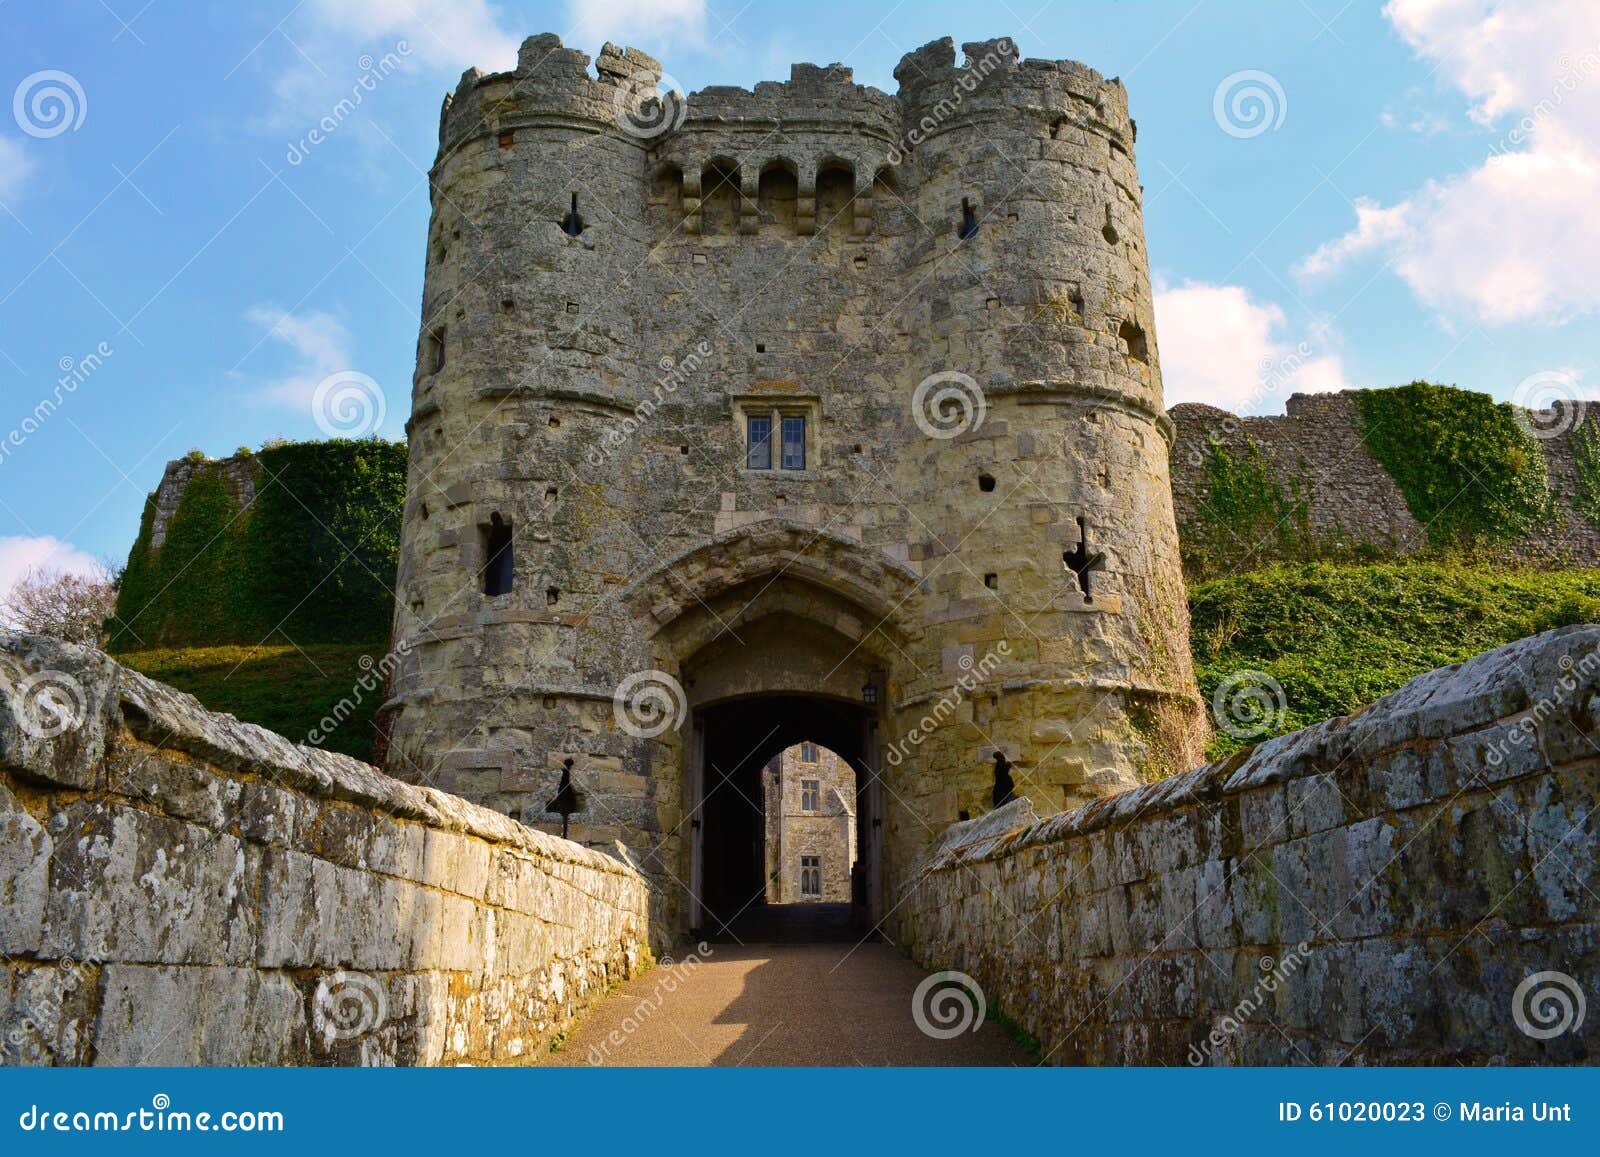 entrance gate to carisbrooke castle in newport, isle of wight, england